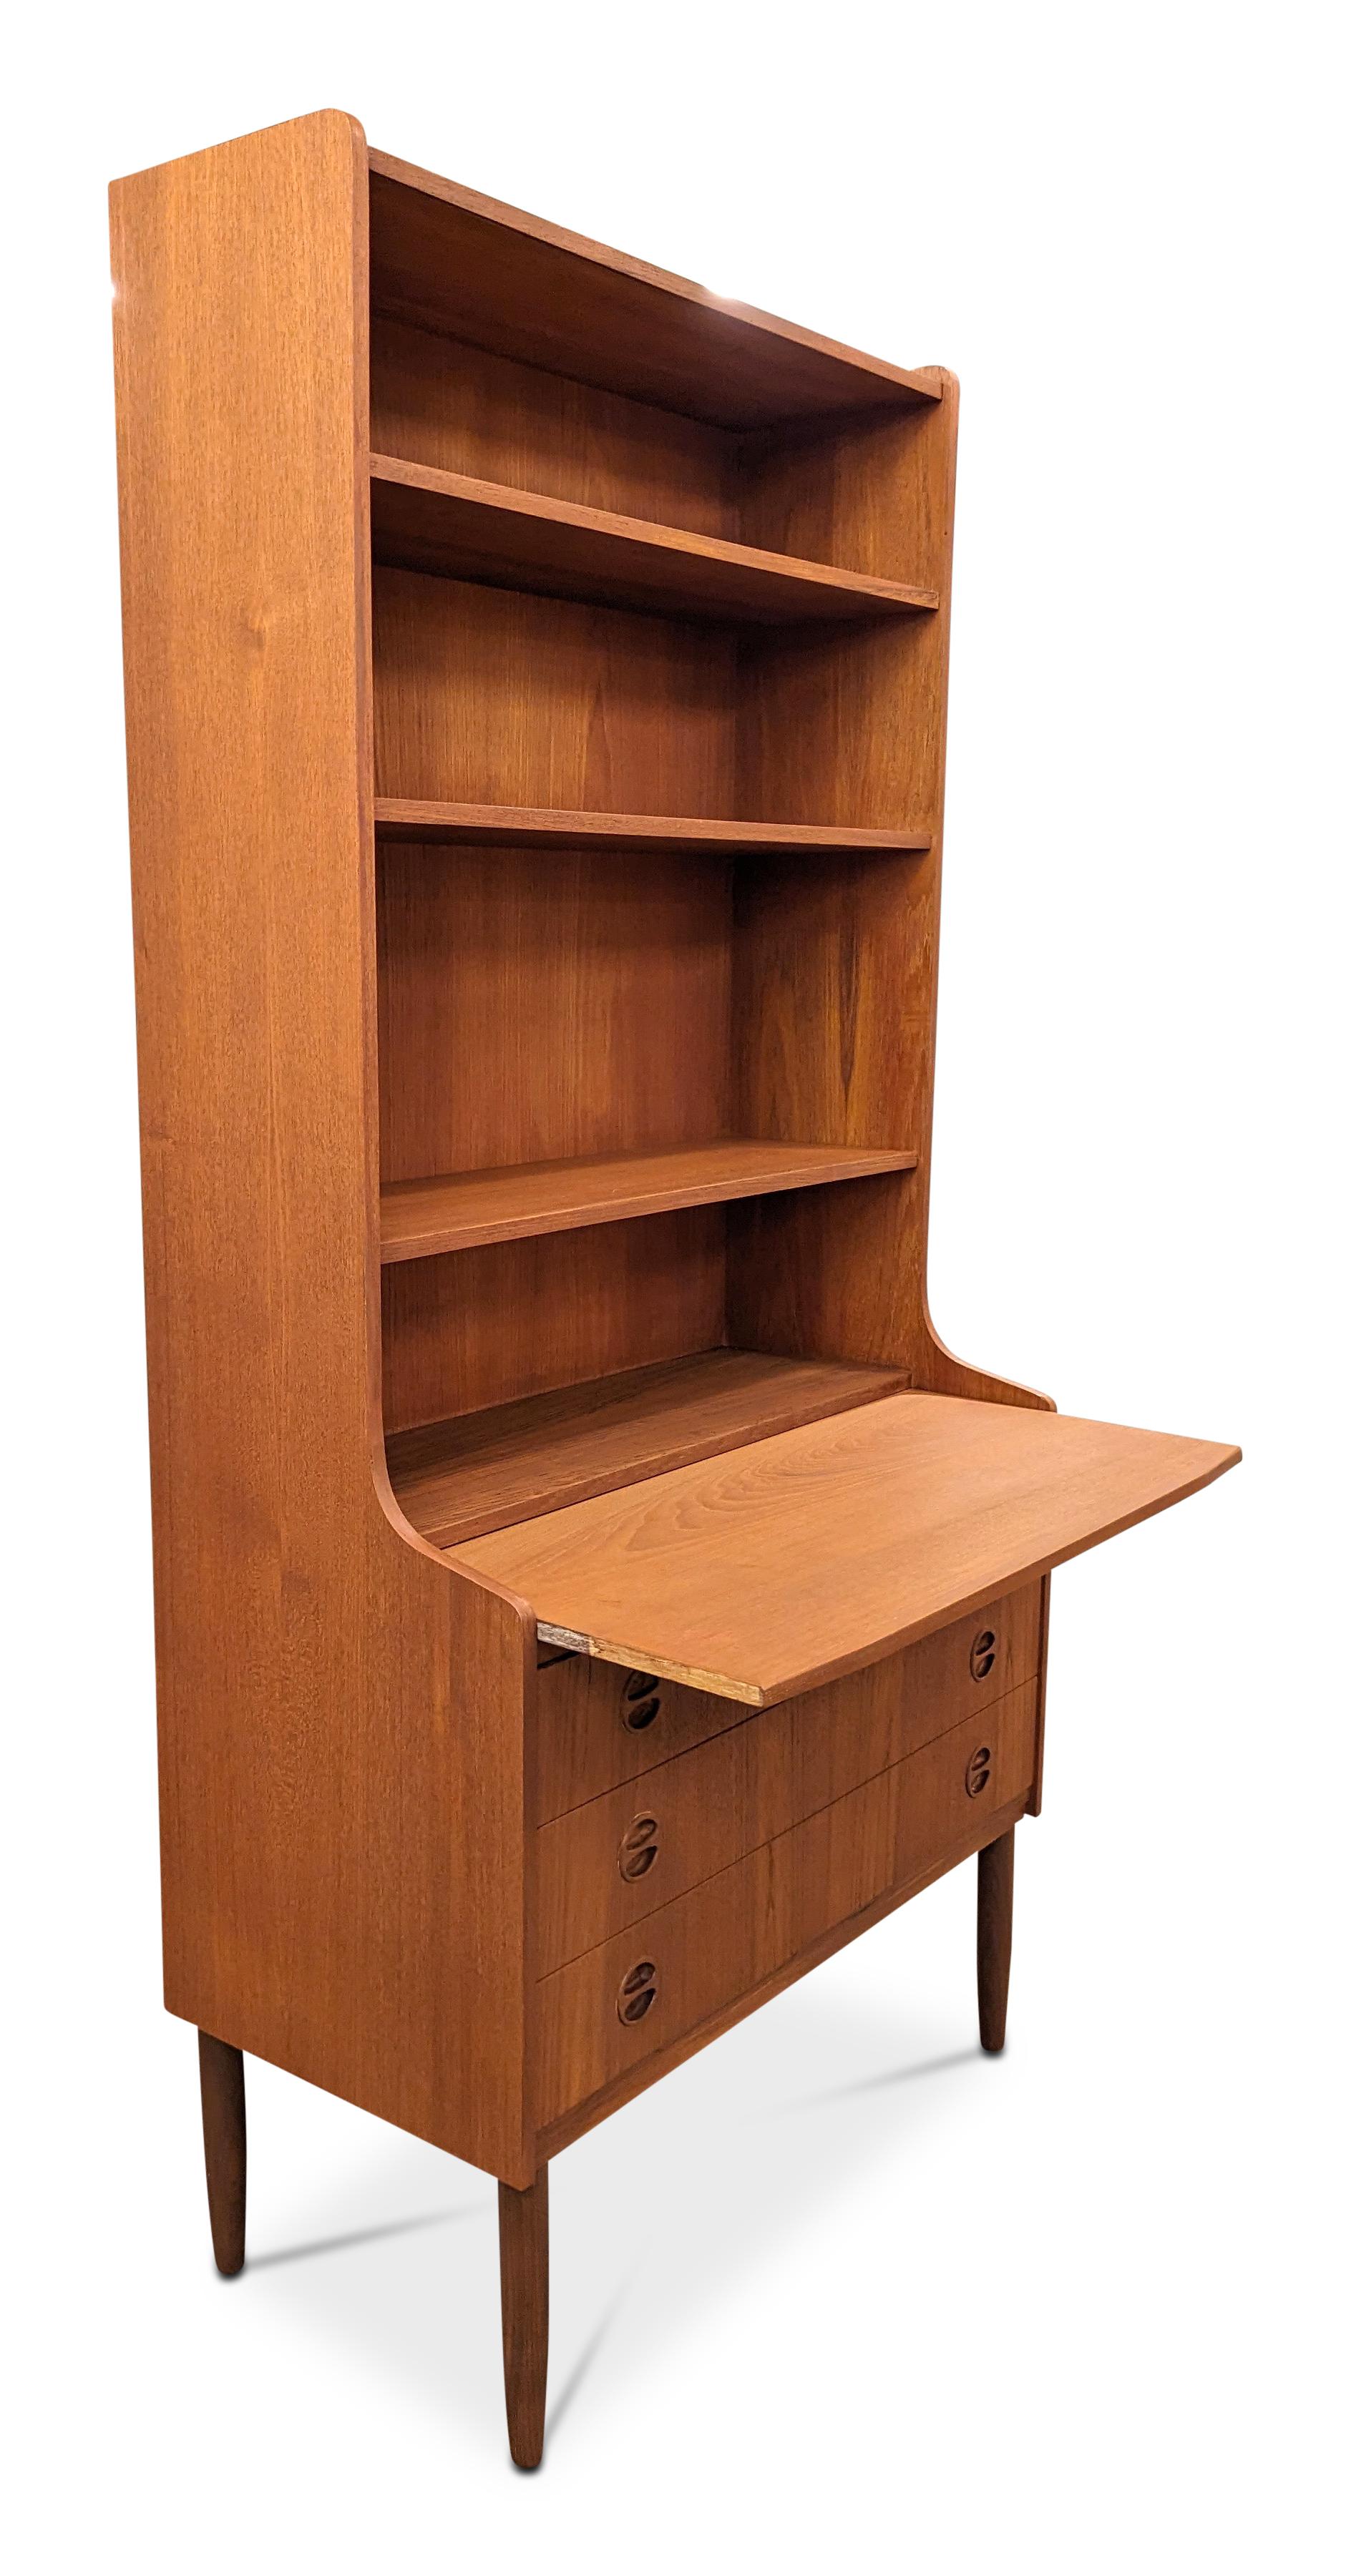 Teak Bookcase - 022440 Vintage Danish Mid Century  In Good Condition For Sale In Jersey City, NJ